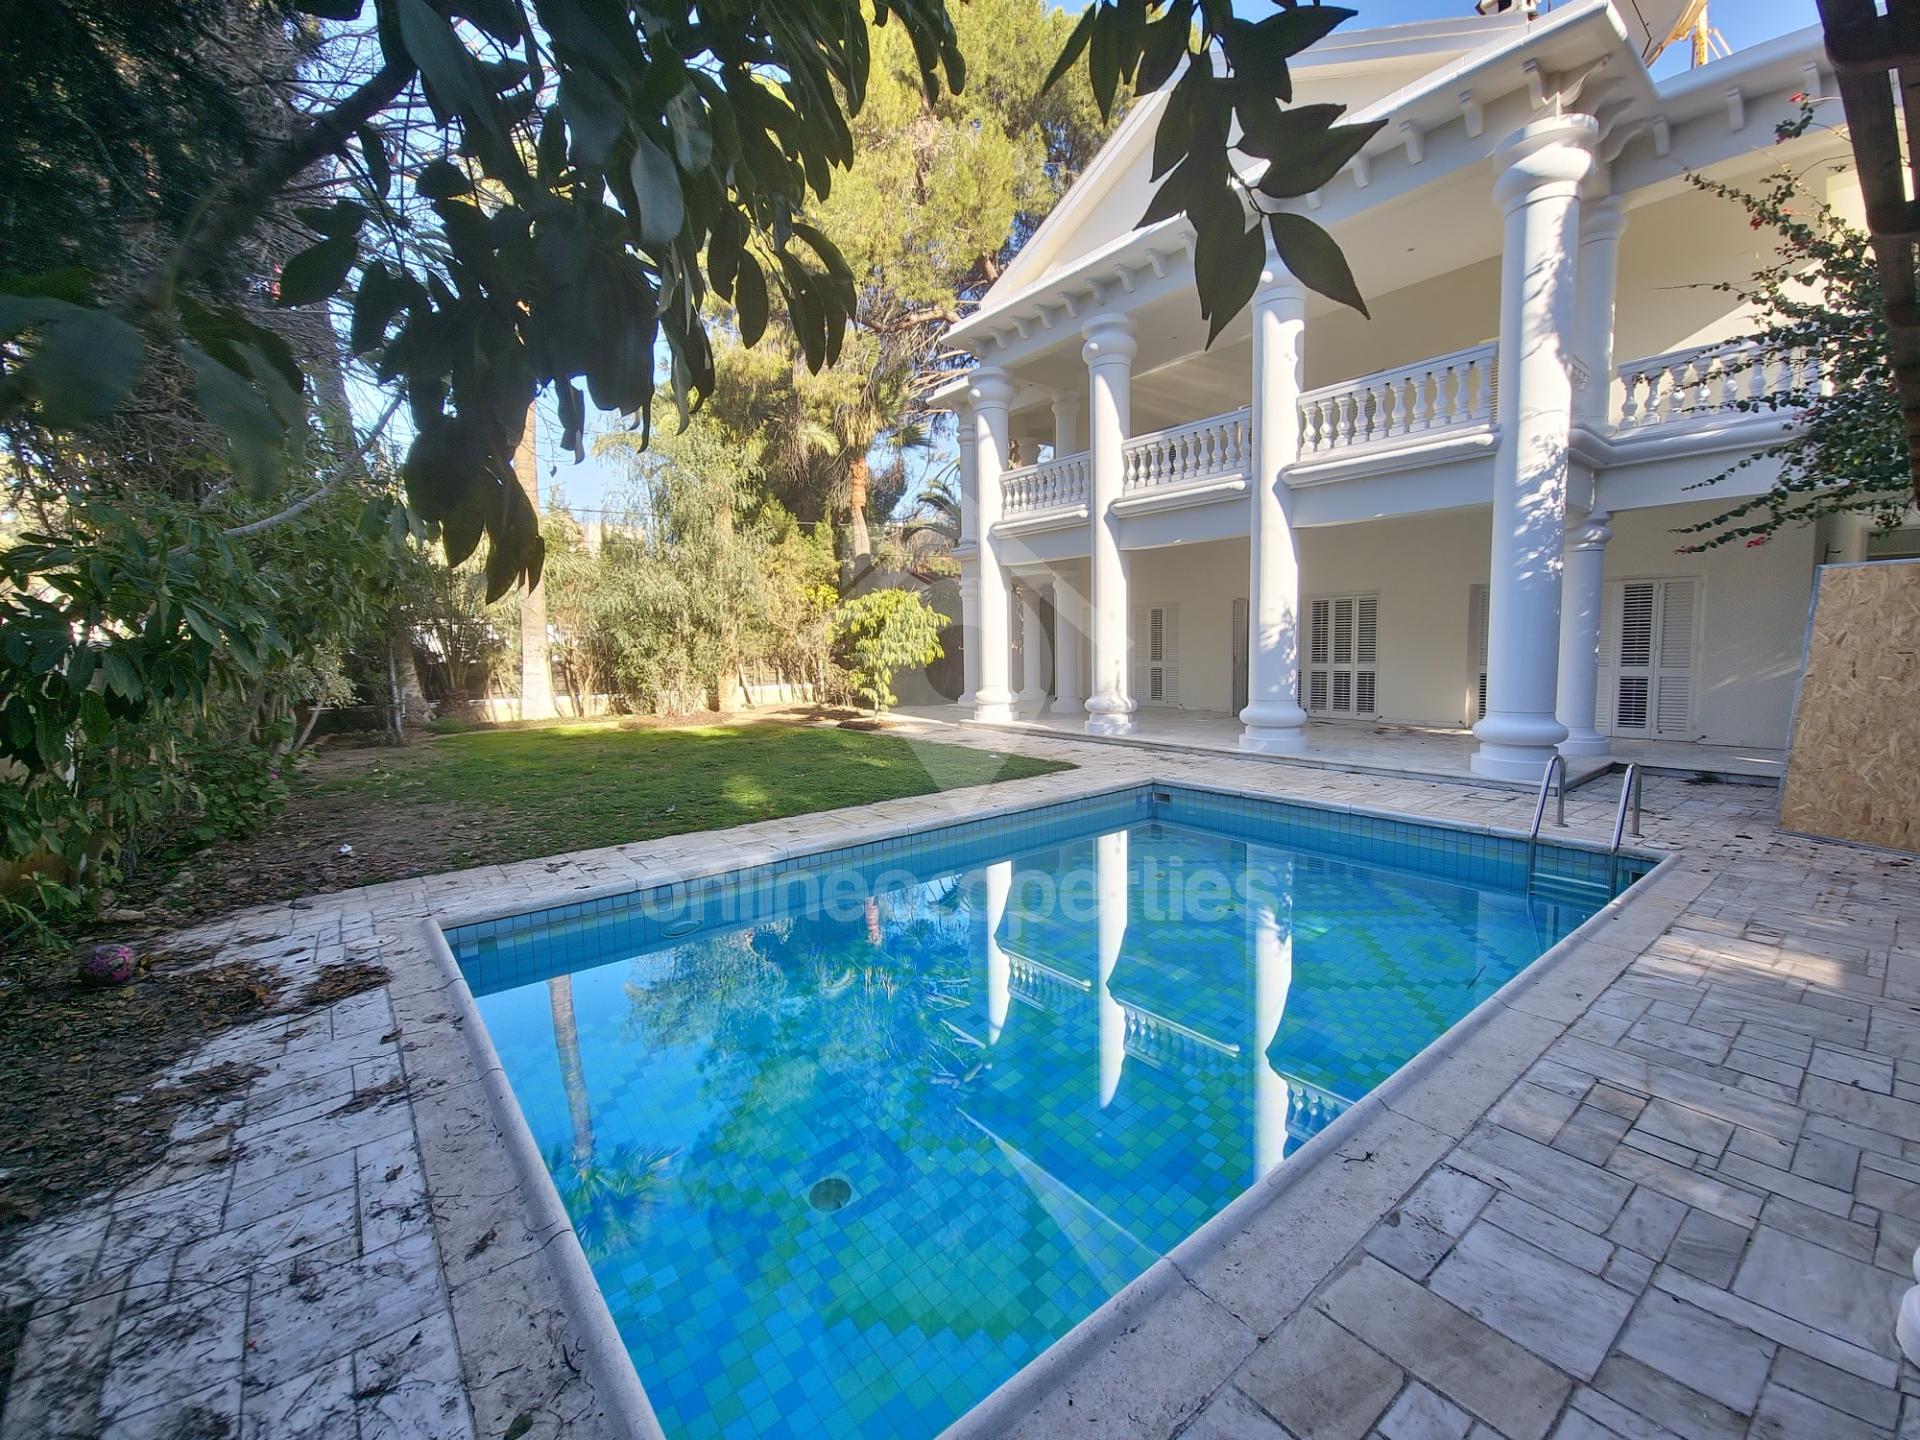 Luxurious Neoclassic Villa with Private Pool for Rent - Undergoing Renovations